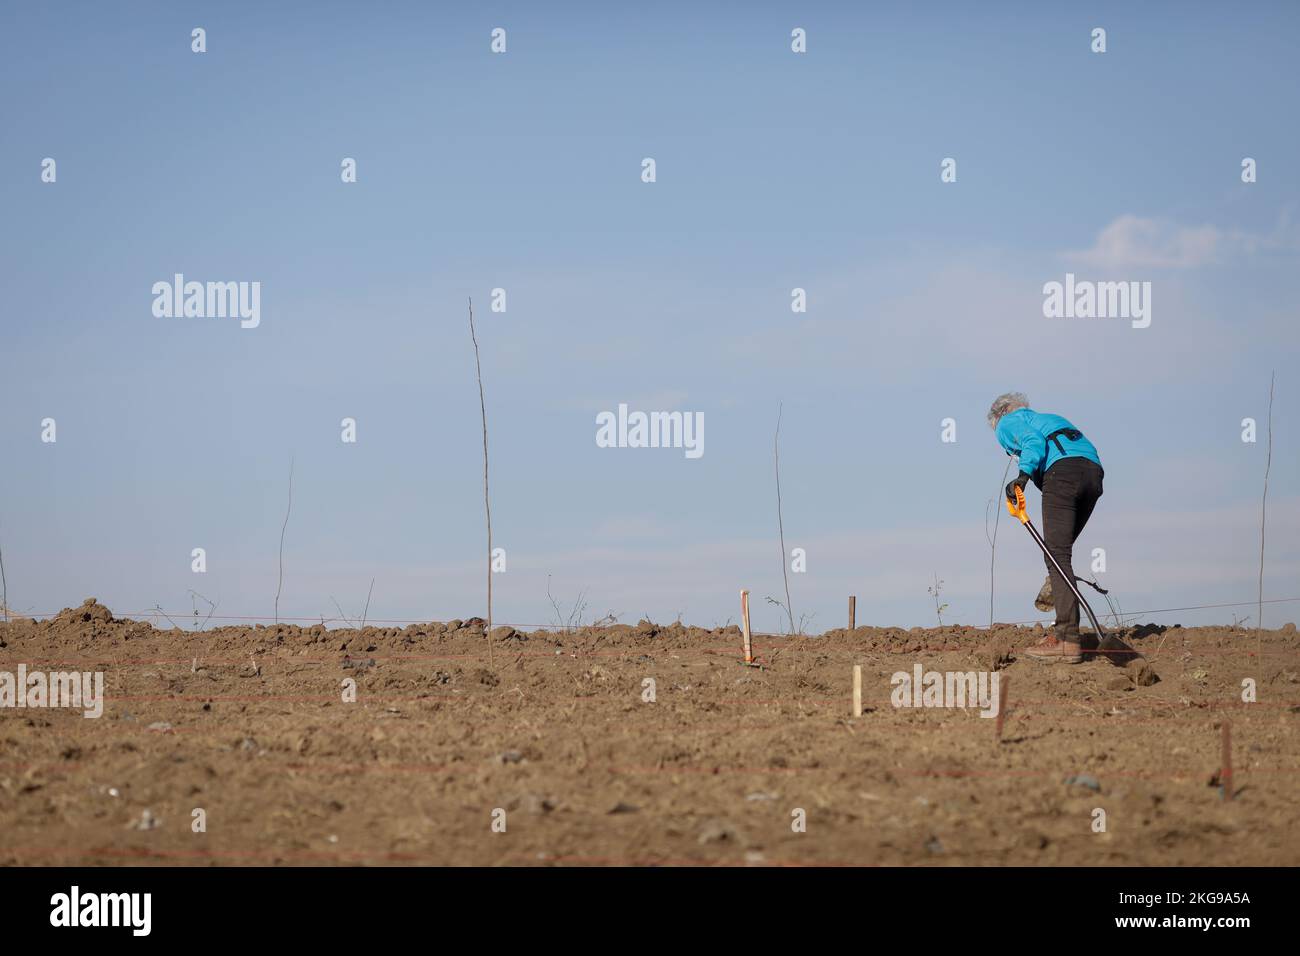 Senior woman using a shovel on dry, arid and dusty soil during a planting activity. Stock Photo